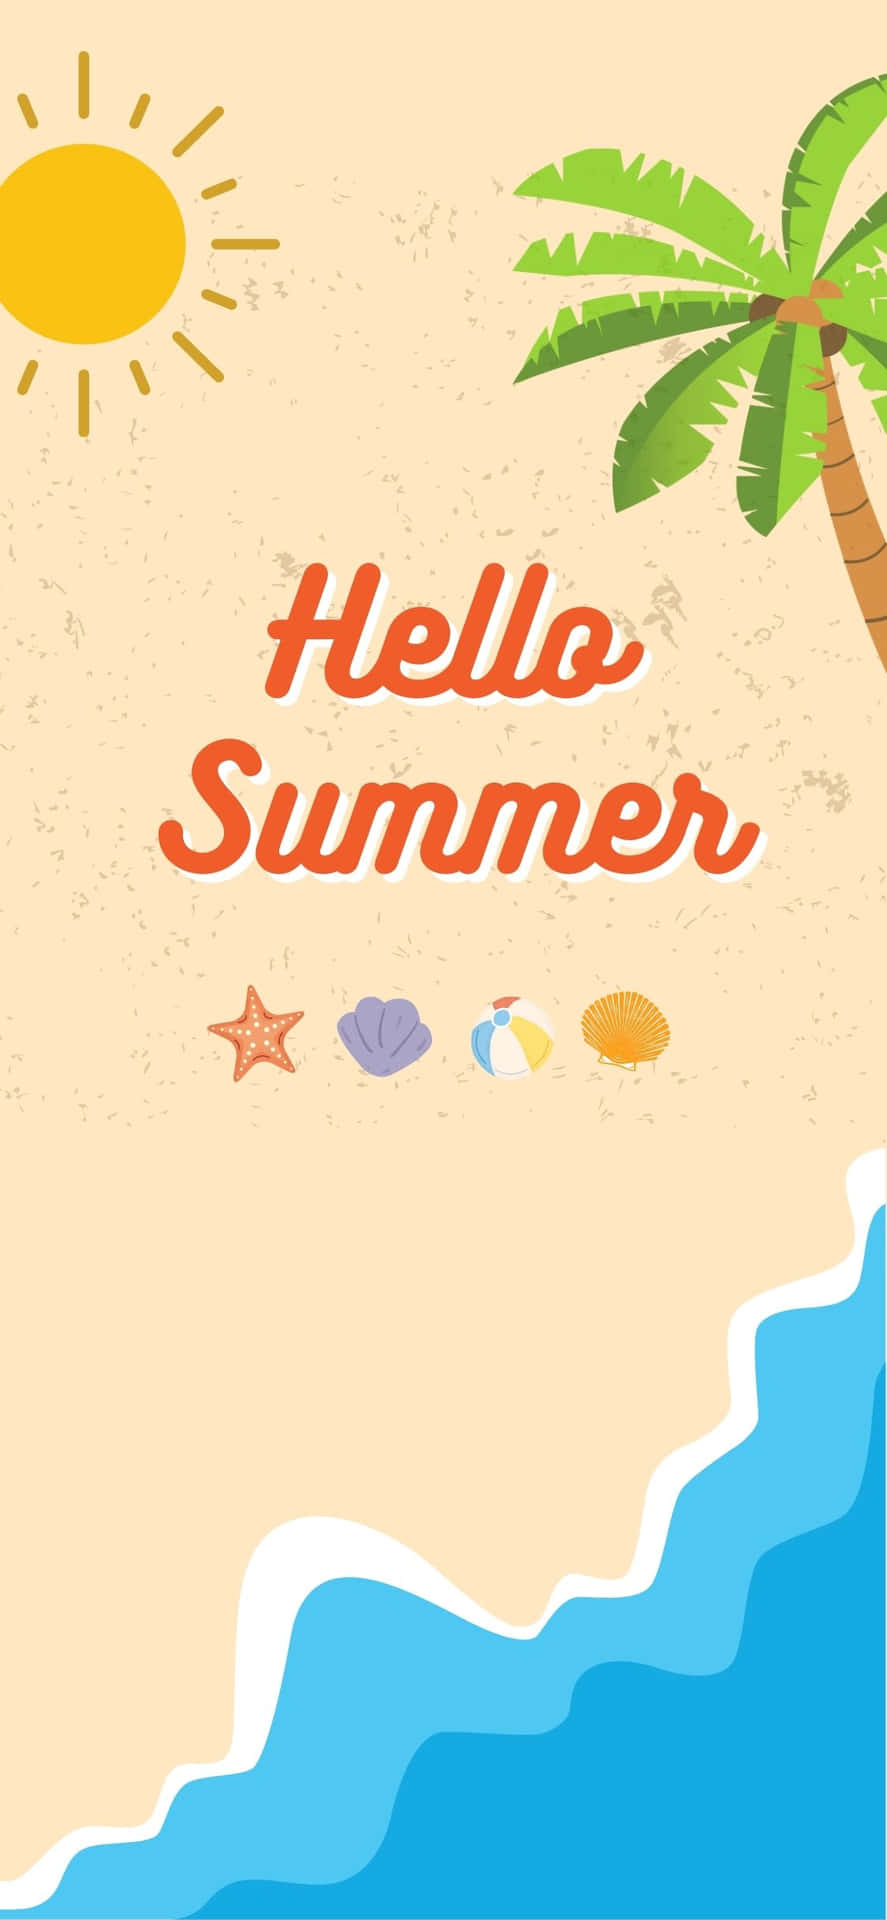 Beach Top View Illustration iPhone X Summer Background